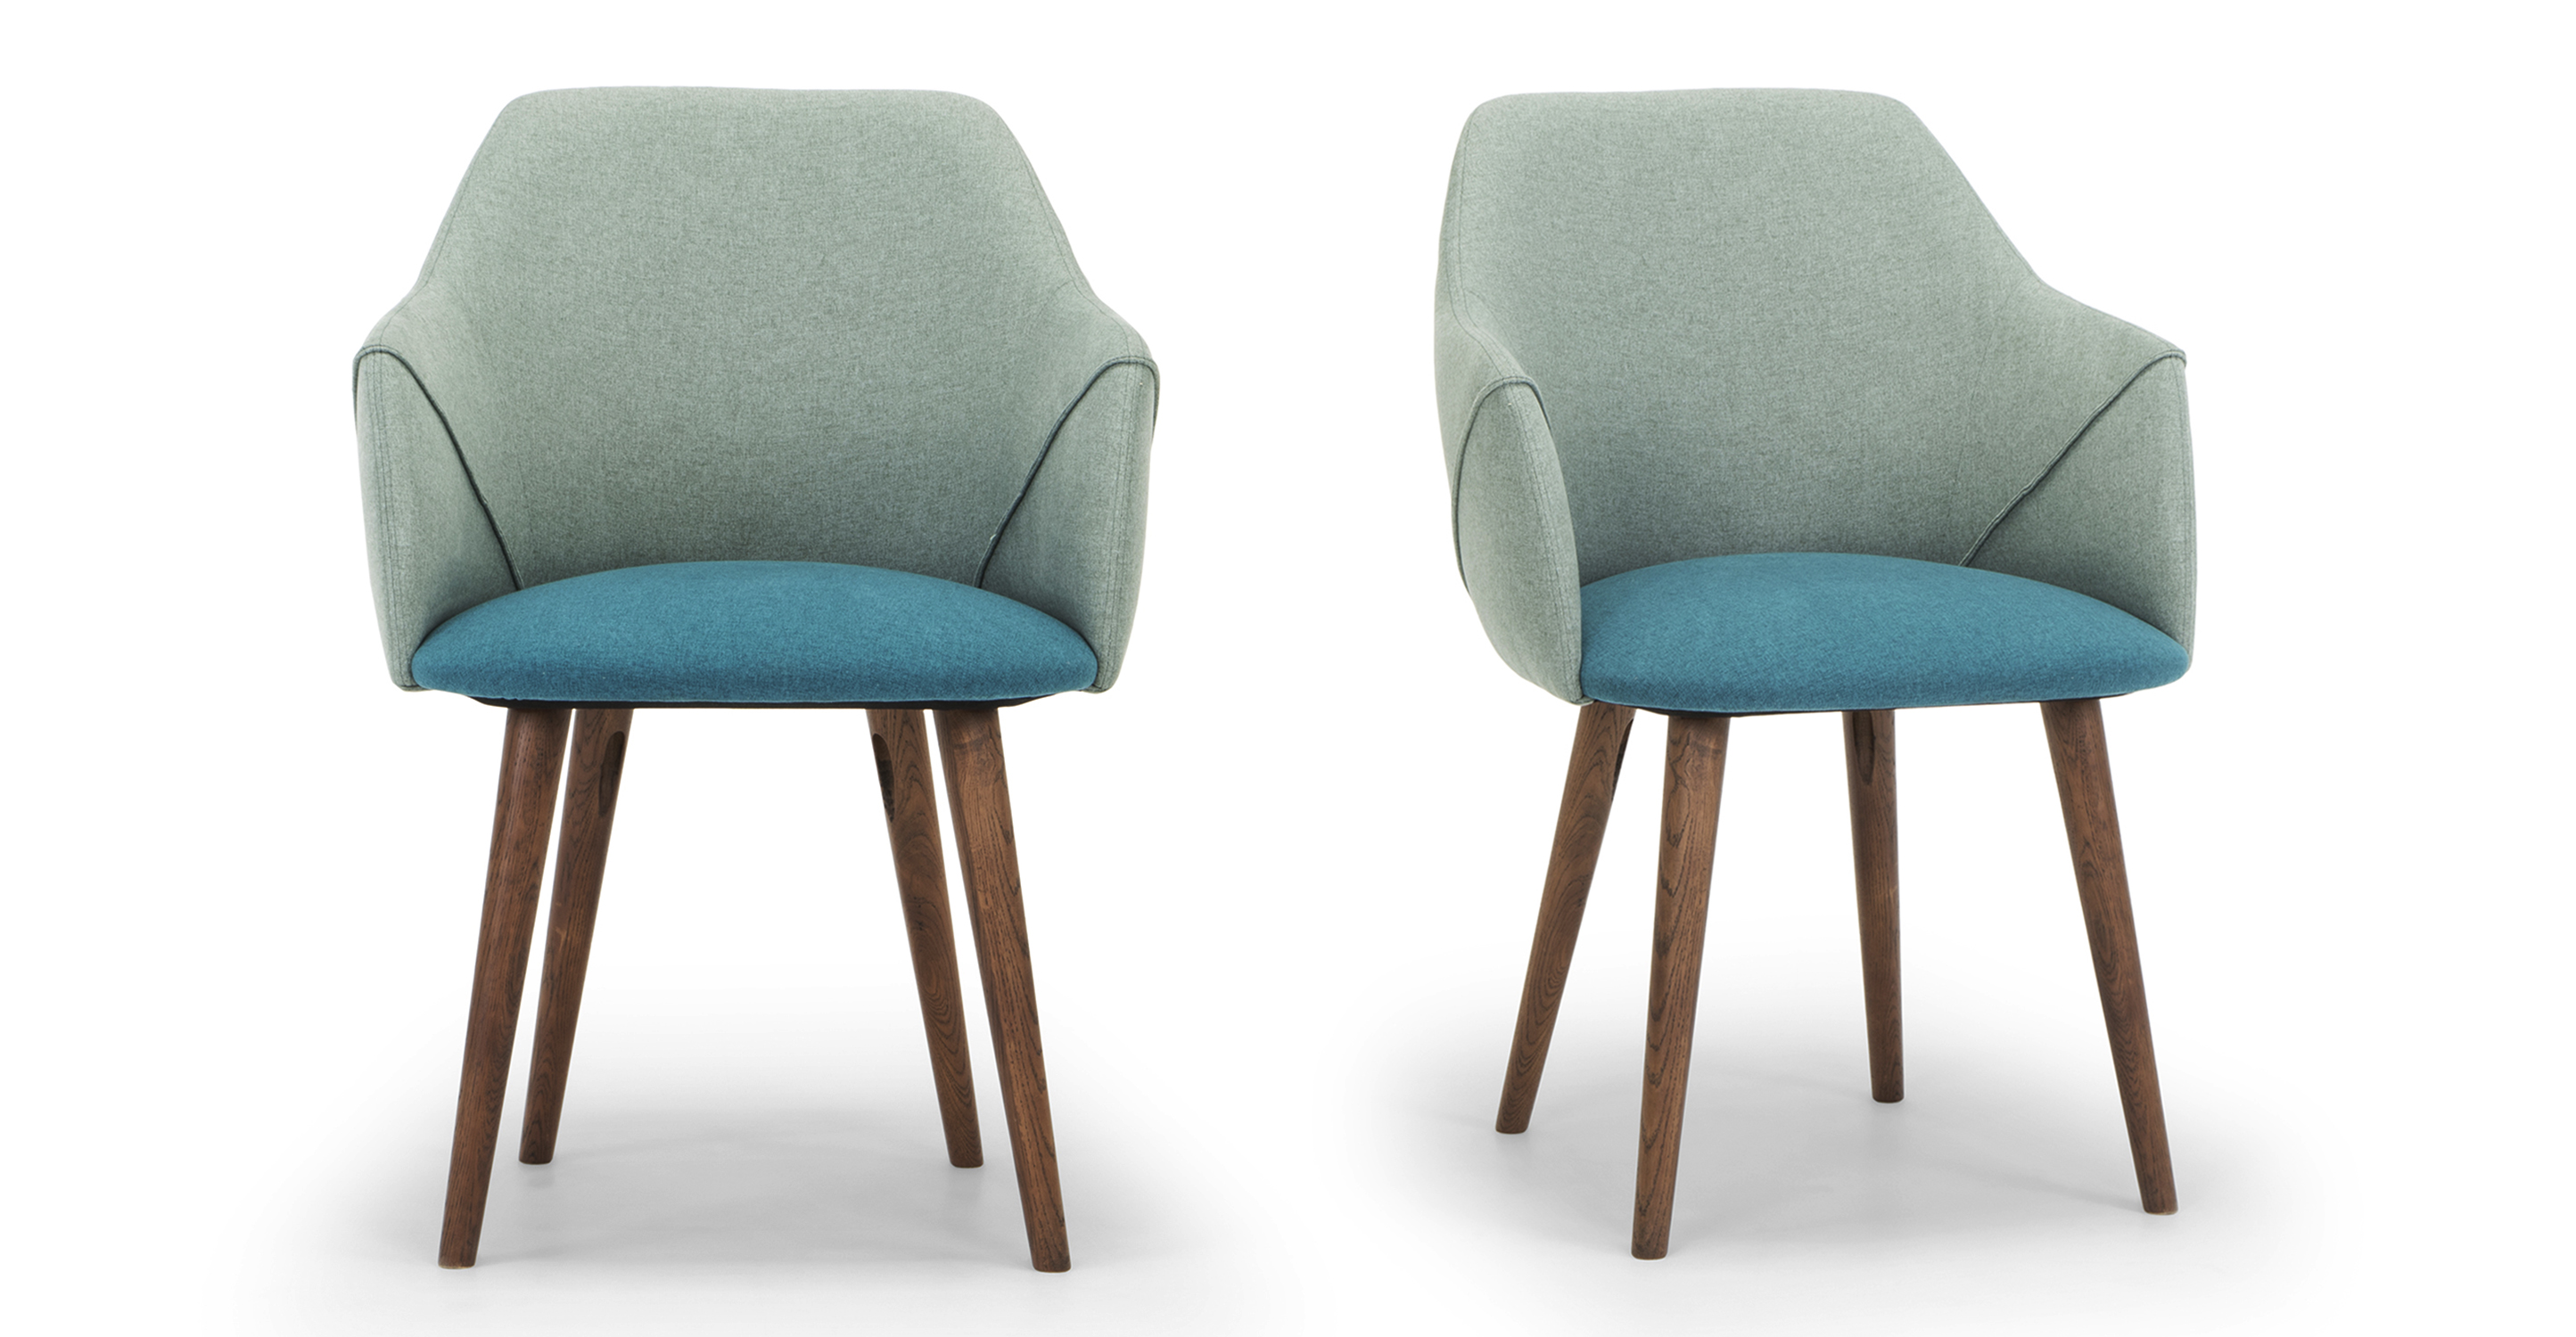 Two Berki dining Chairs in Adriatic/Scuba fabric which is 100% Polyester. Seat cushion is blue upholstery, remainder of upholstery is soft green. Stiletto legs are stained walnut. Slanted piping gives dimension to the chair. Back of chair is higher with a gentle slope down to solid arms.